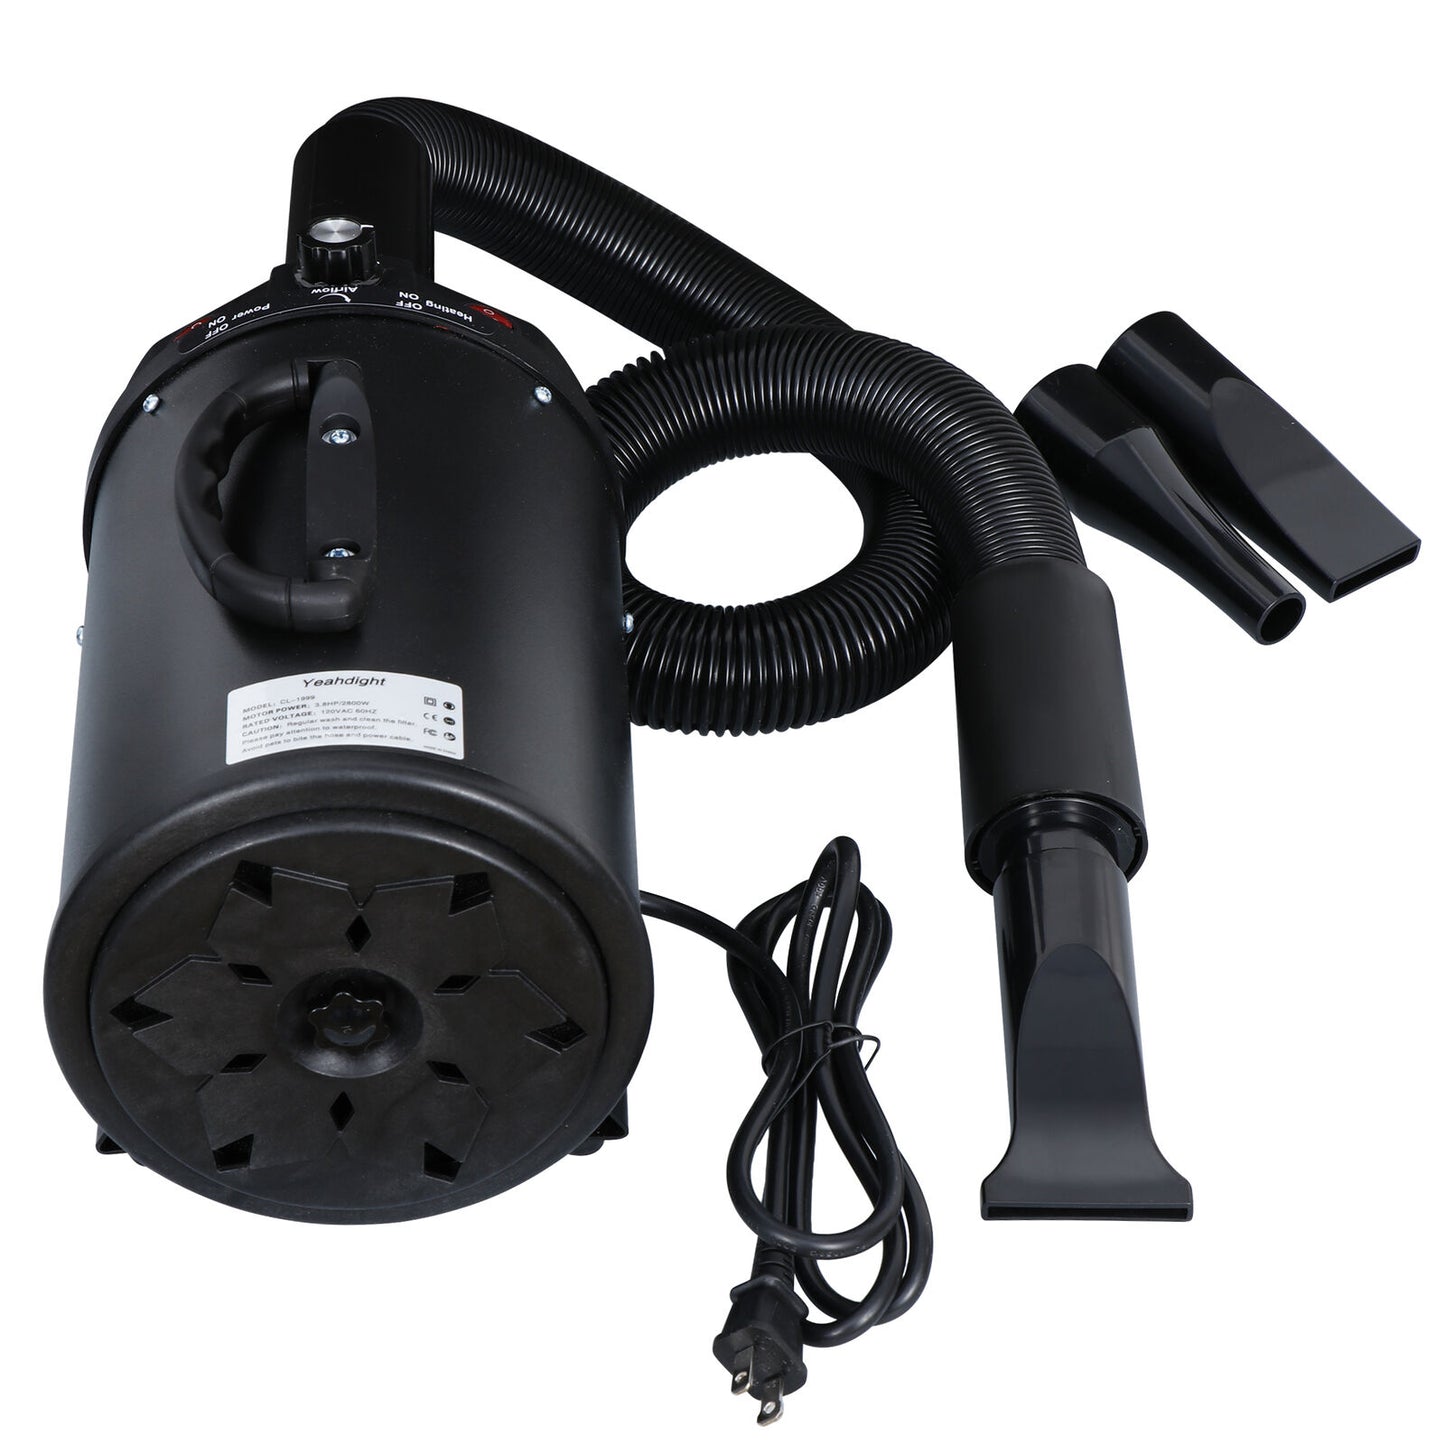 2400W Portable Pet Grooming Quiet Hair Dryer Blow Blaster Blower For Dogs & Cats